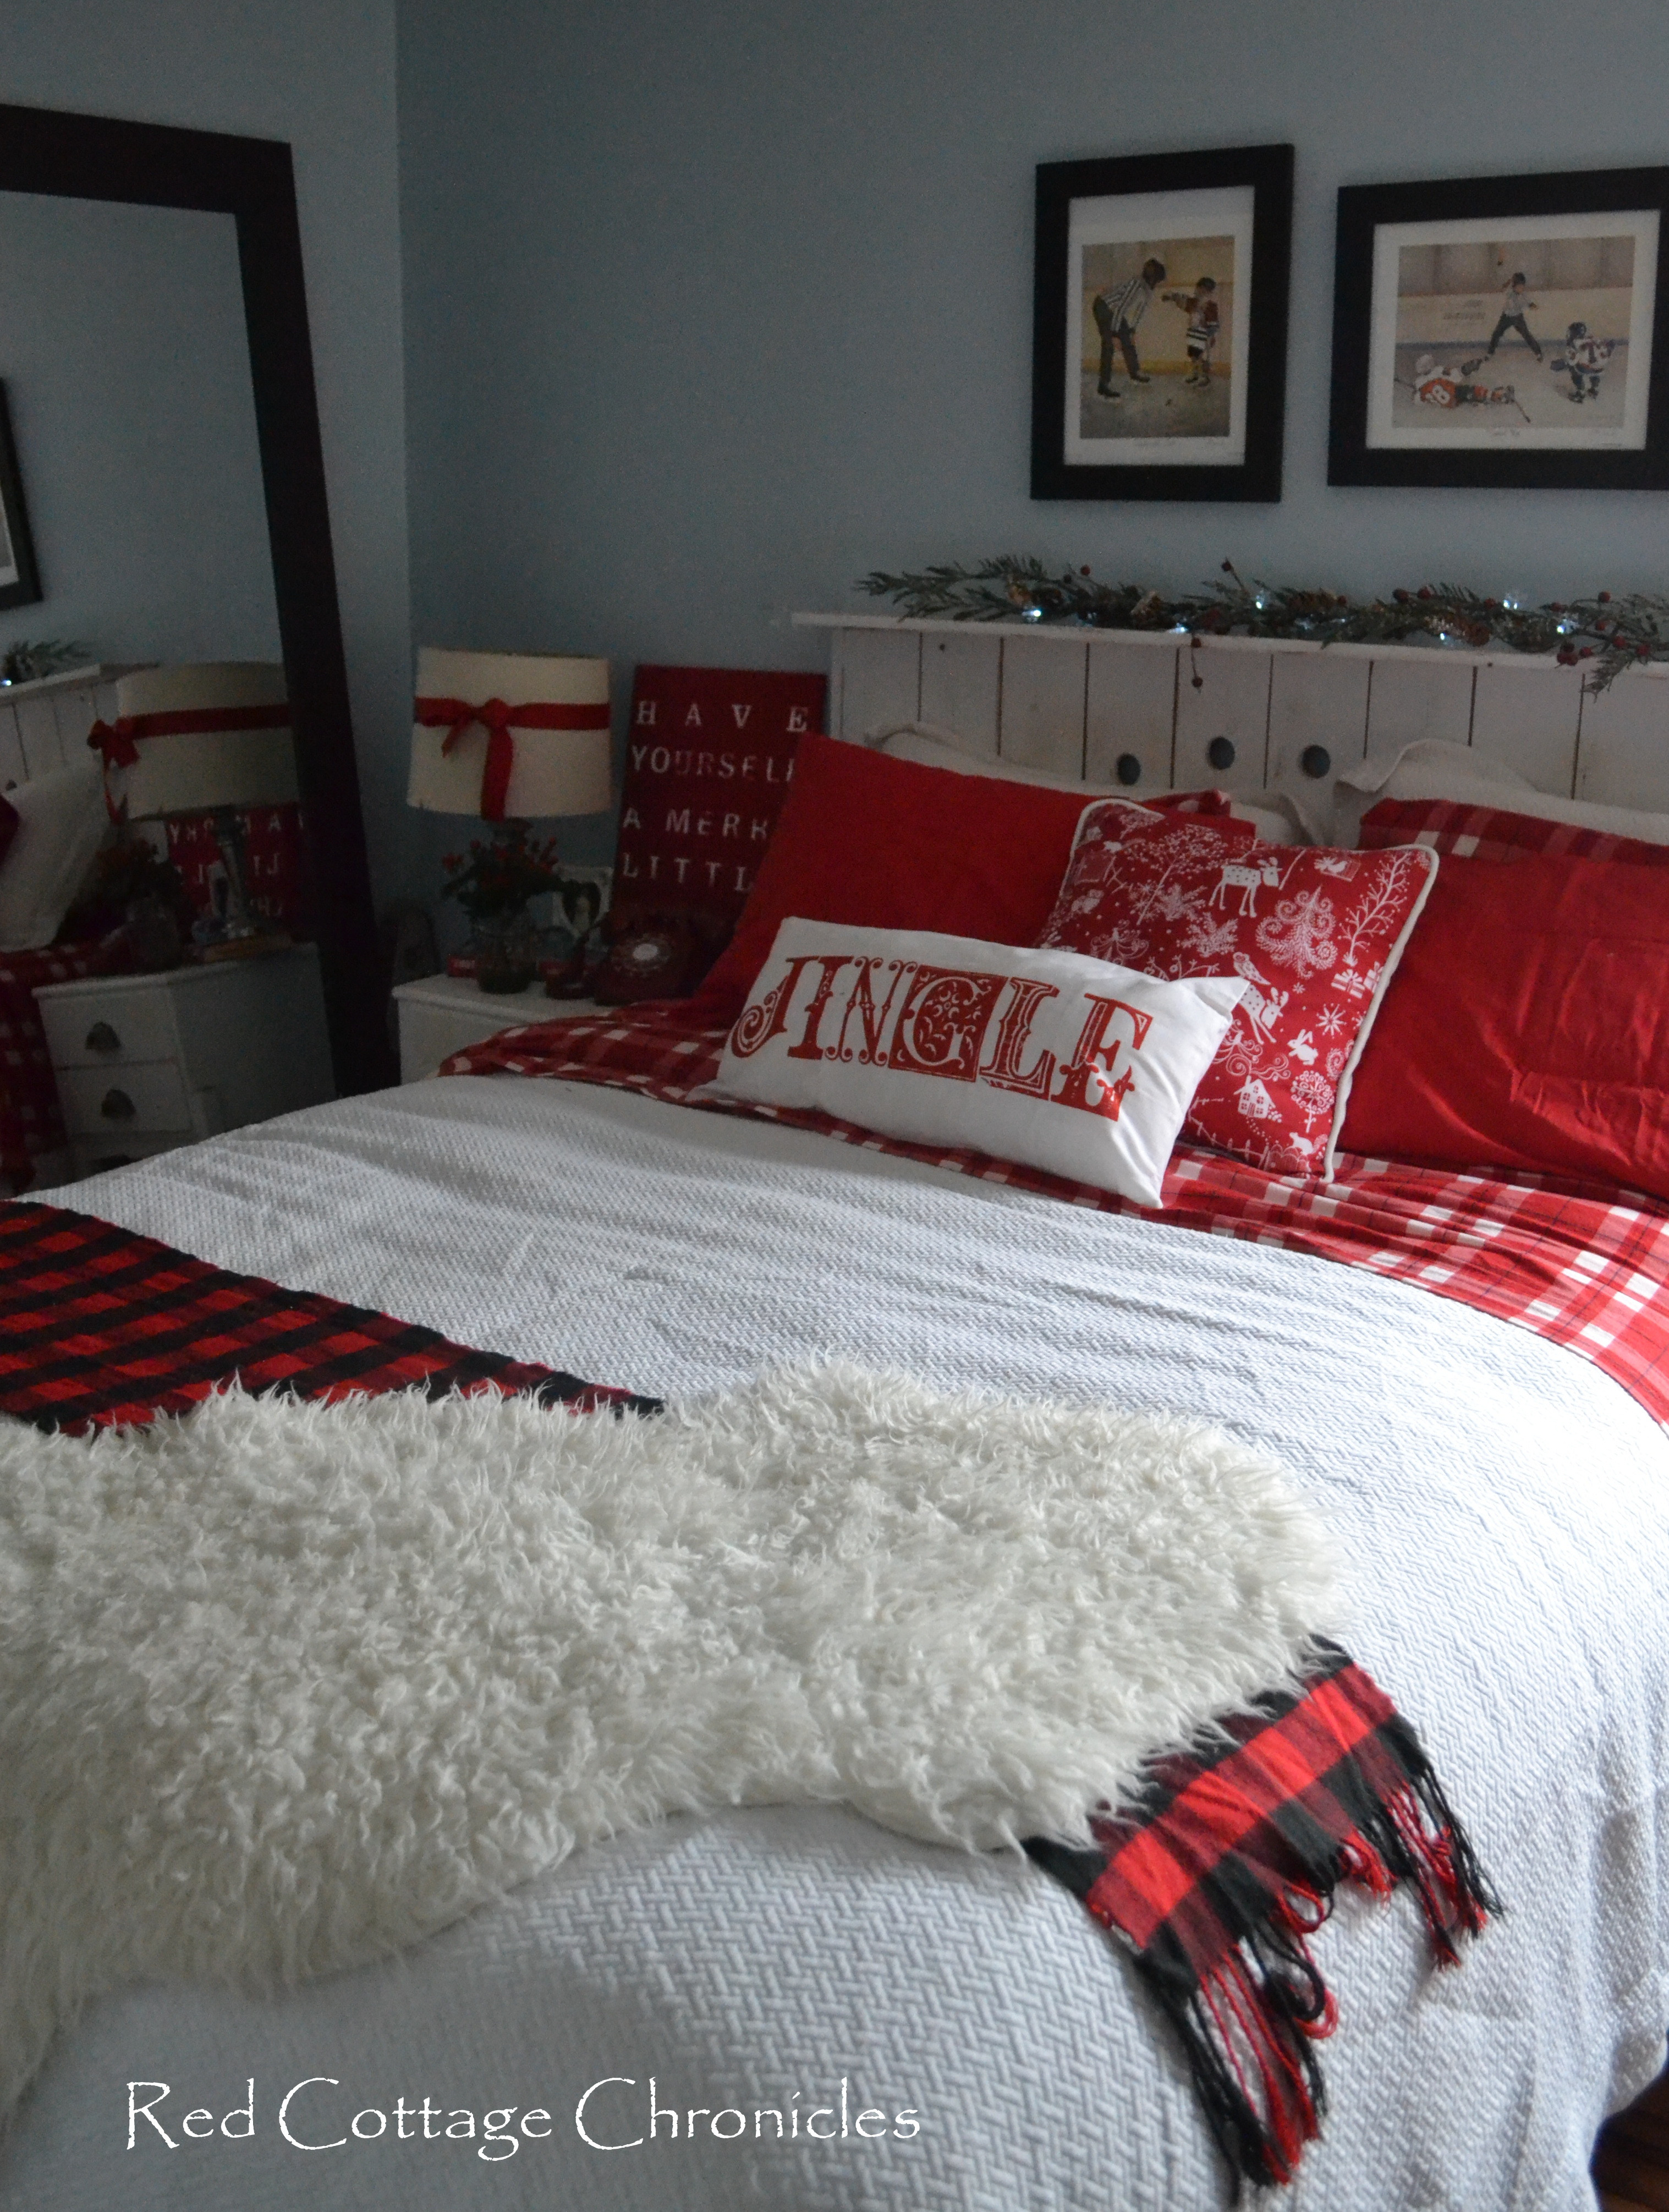 Christmas Decor Bedroom
 Our Christmas Bedroom Red Cottage Chronicles